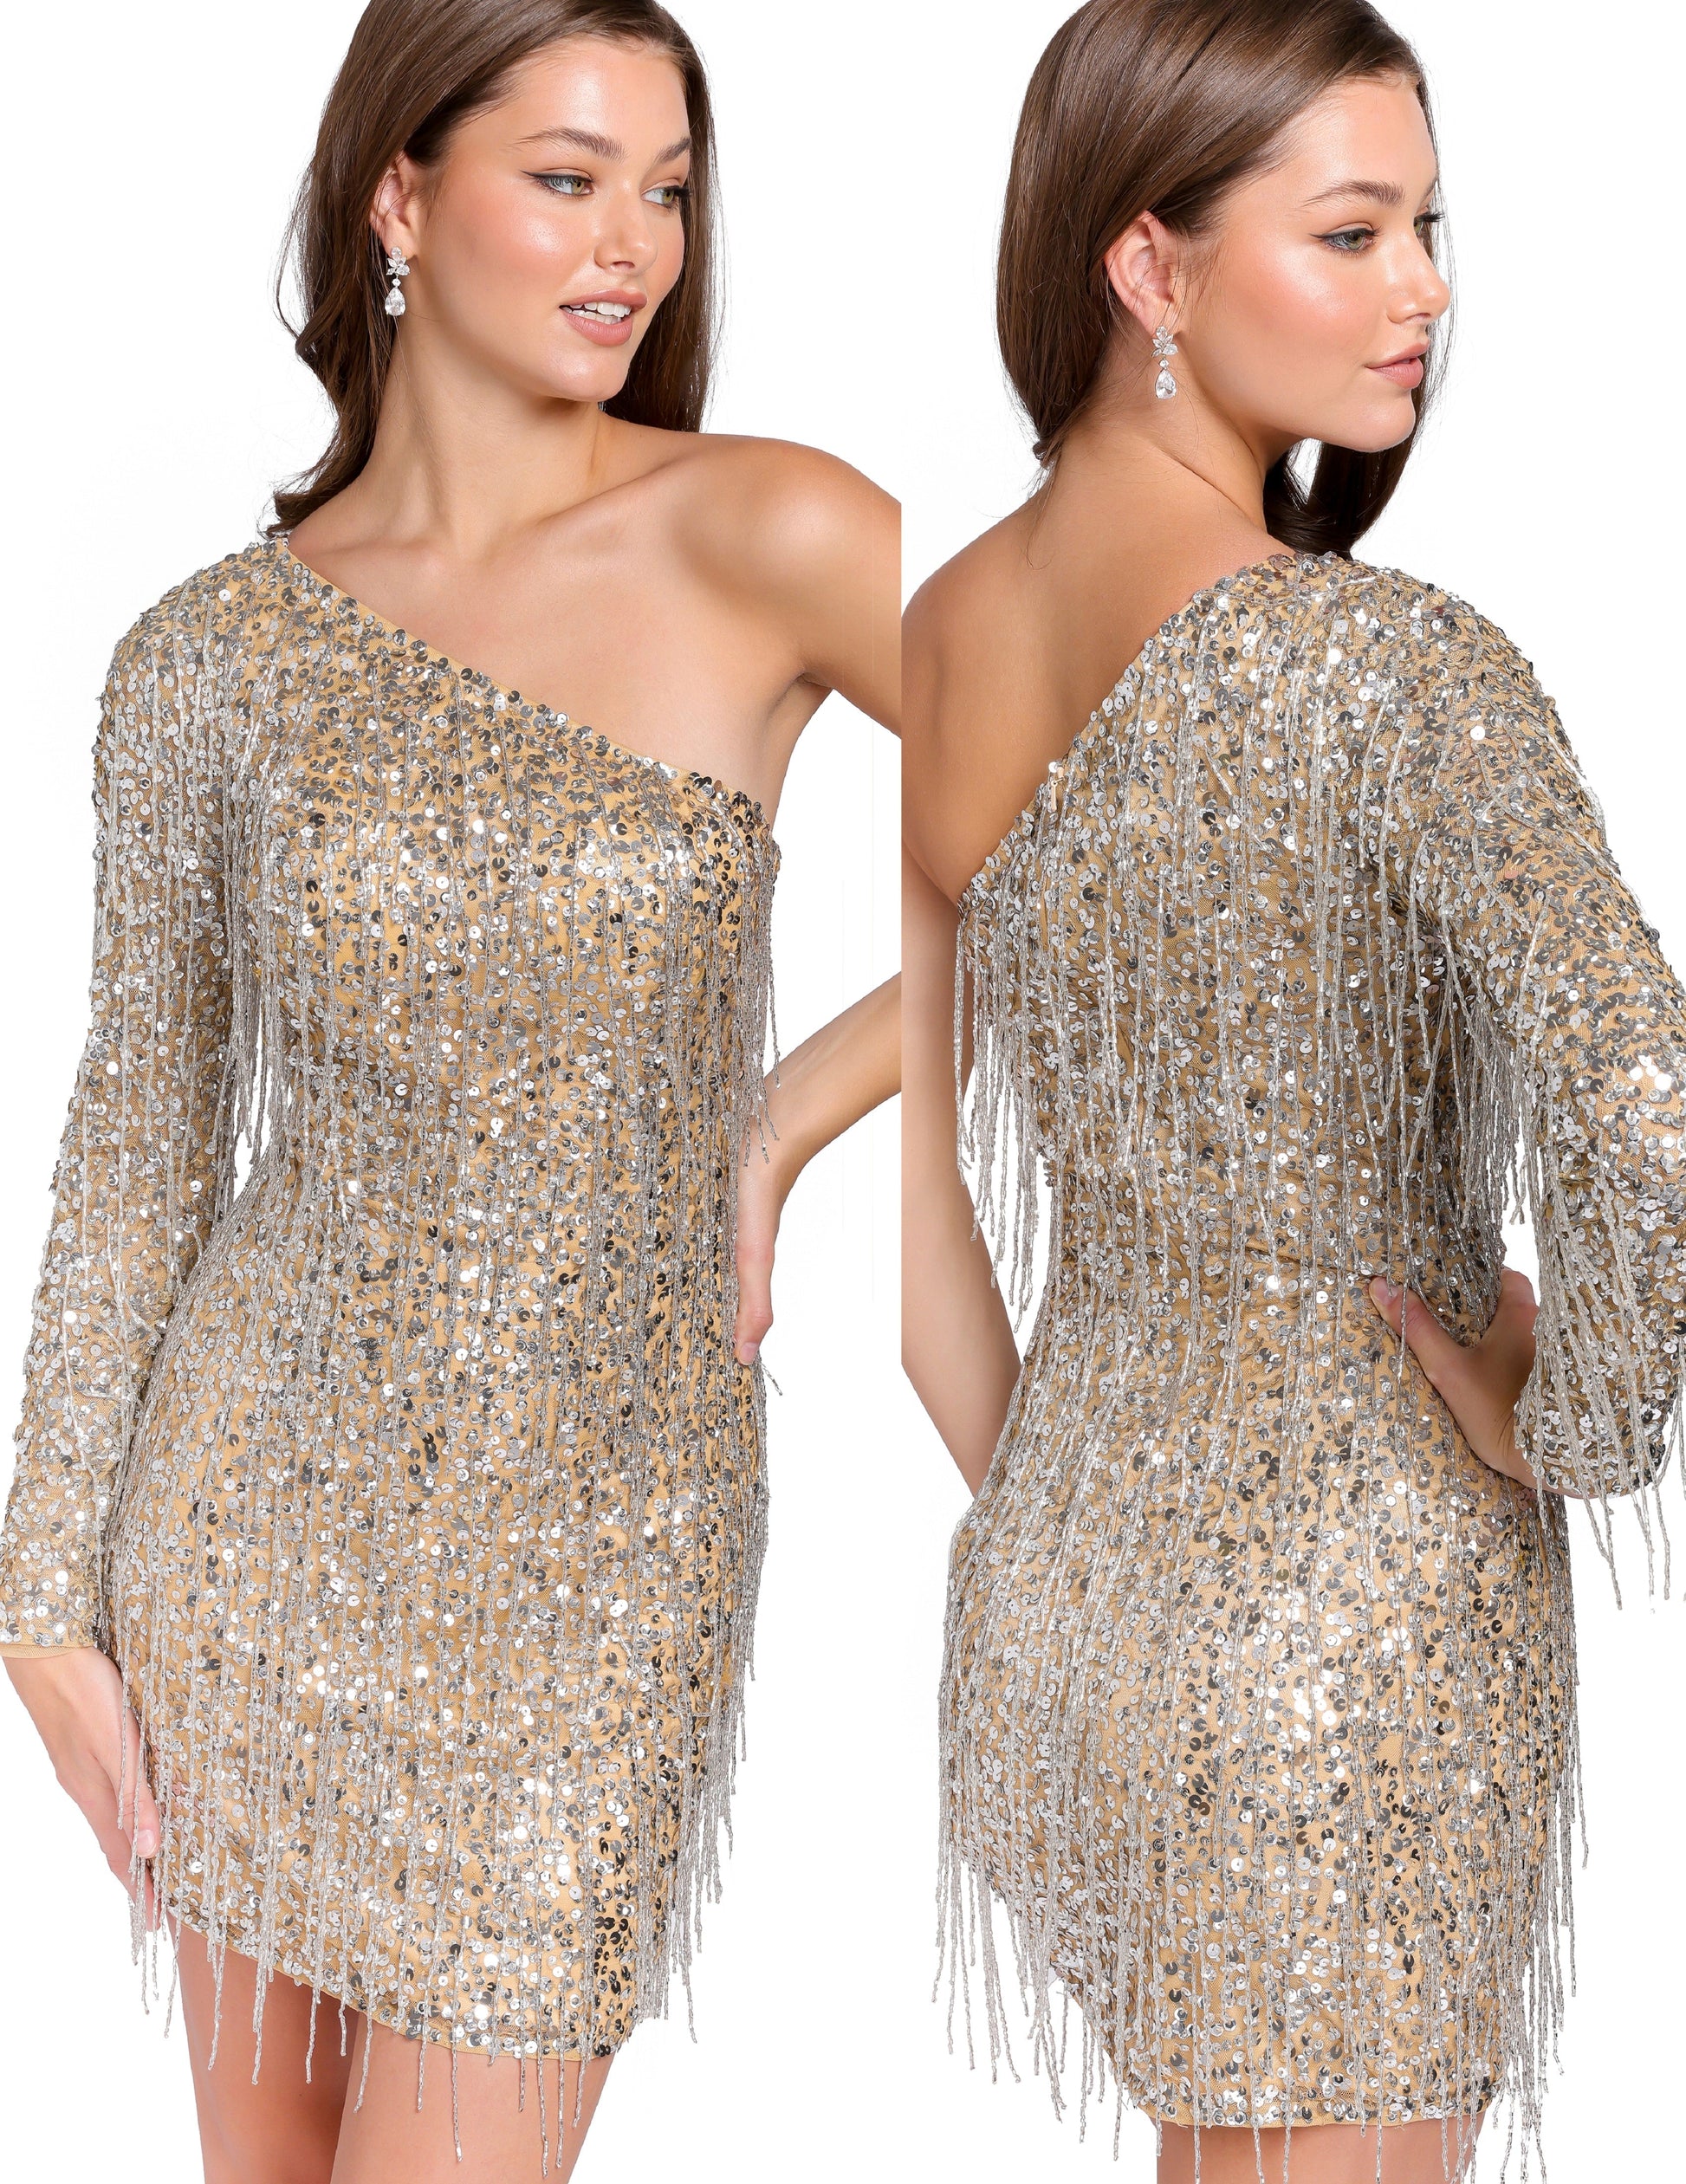 Primavera Couture 3858 Short 2022 Homecoming dress Fitted sequin beaded short cocktail dress  Available Color- Nude Silver  Available Size- 0